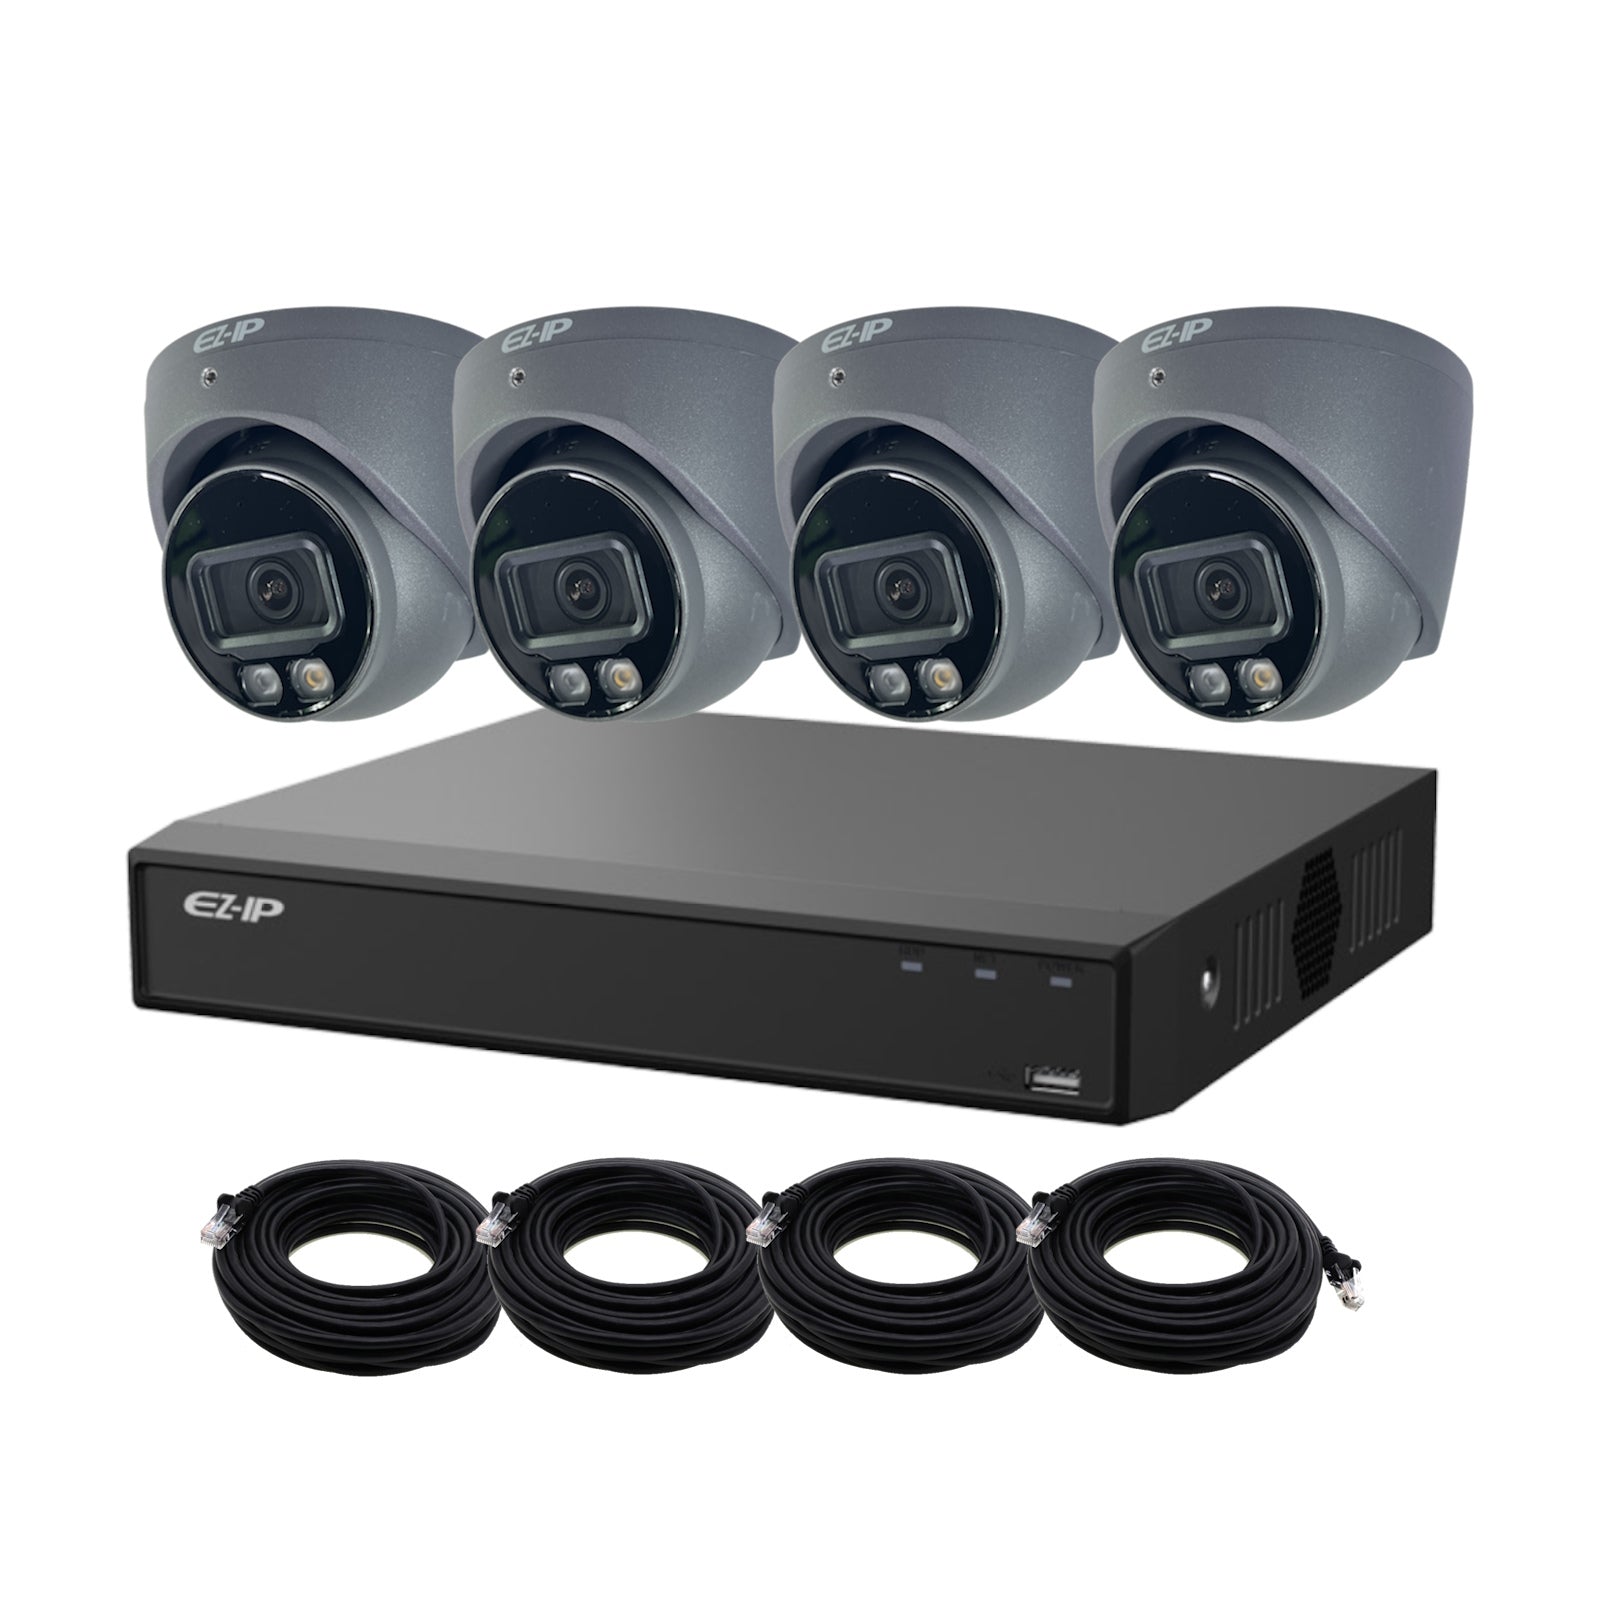 8MP EZ-IP by Dahua Full-Colour IP POE CCTV Kit with 4 Cameras, 2TB